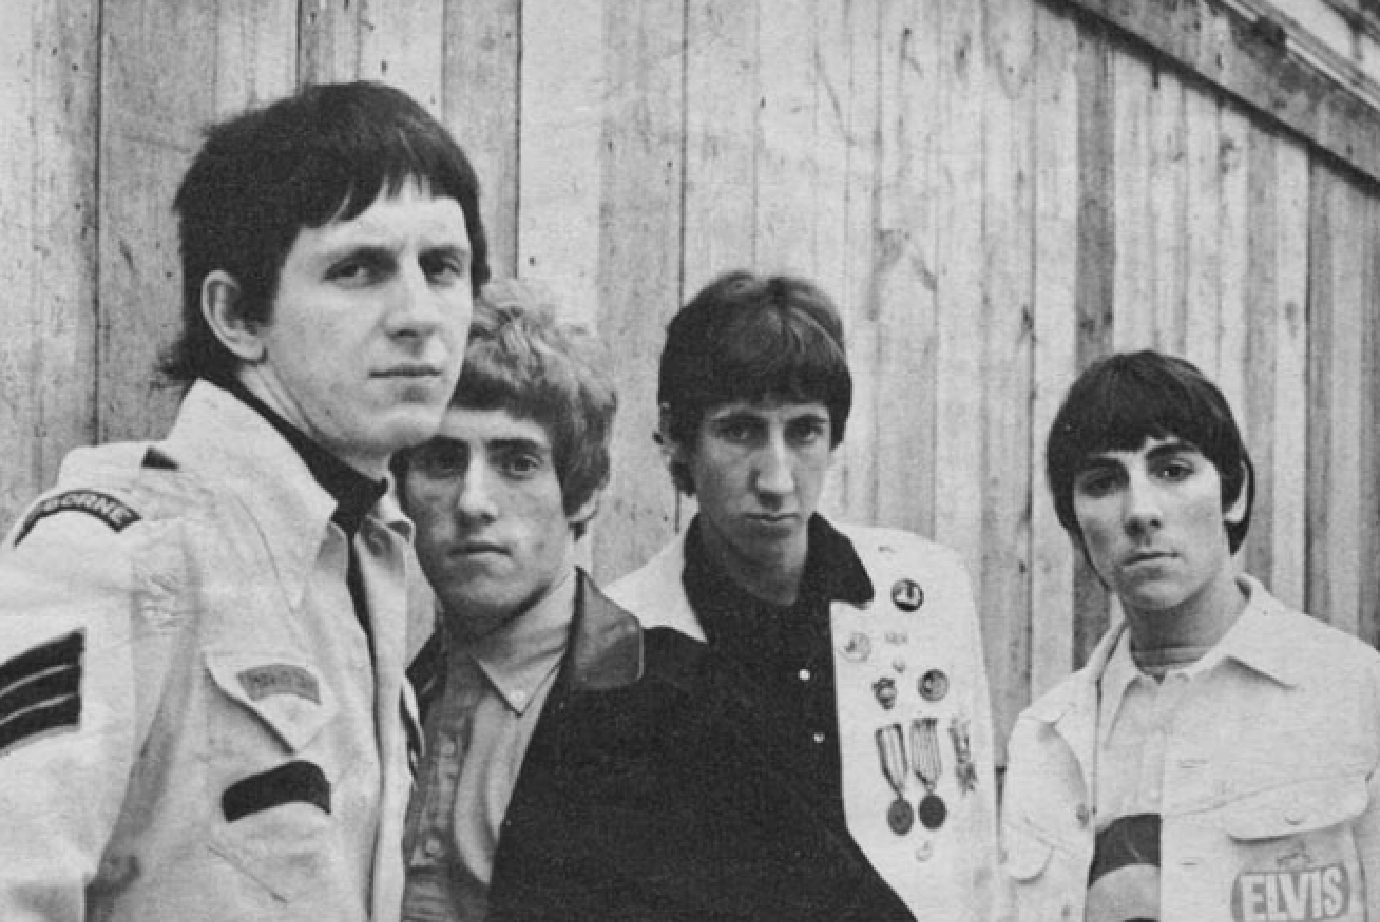 A black and white picture of The Who in their youth